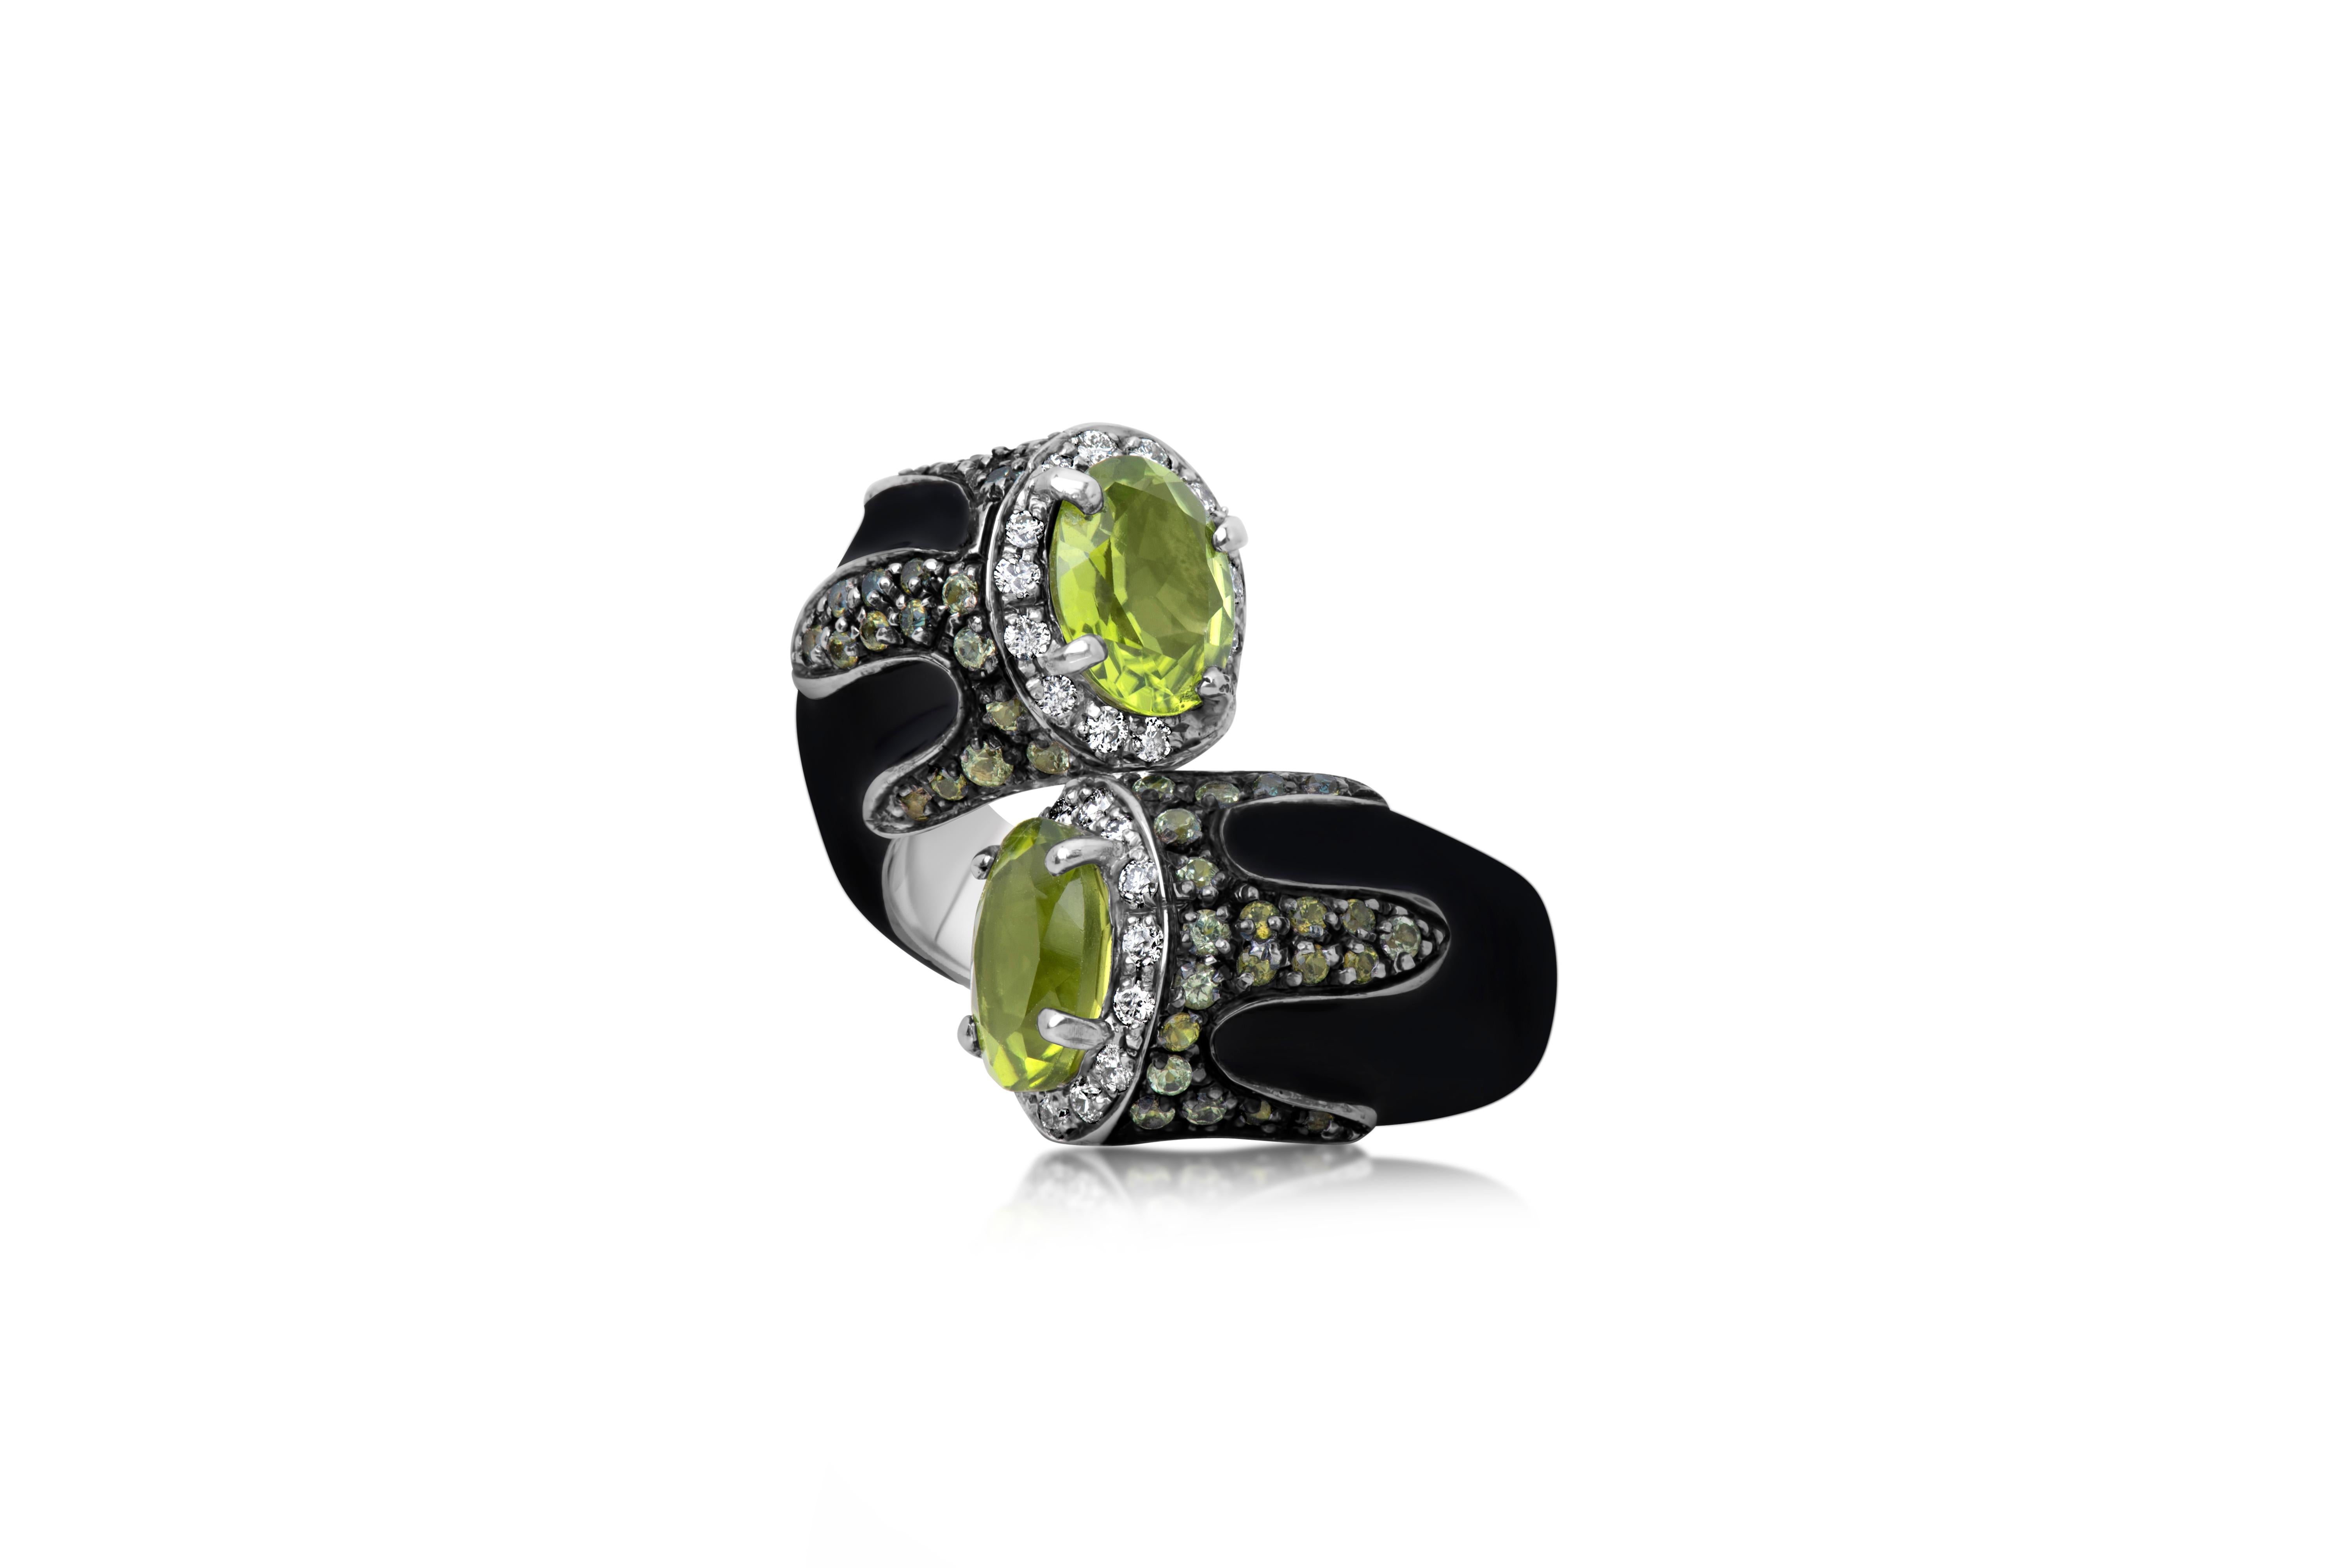 Andreoli Black Enamel Peridot Diamond Bypass Cocktail Ring Silver 18 Karat Gold

This Andreoli ring features:

- 0.38 carat Diamond (F-G-H Color, VS-SI Clarity)
- 3.75 carat Peridot
- Enamel
- 18 Karat White Gold
- Silver Base
- Made in Italy
- Ring